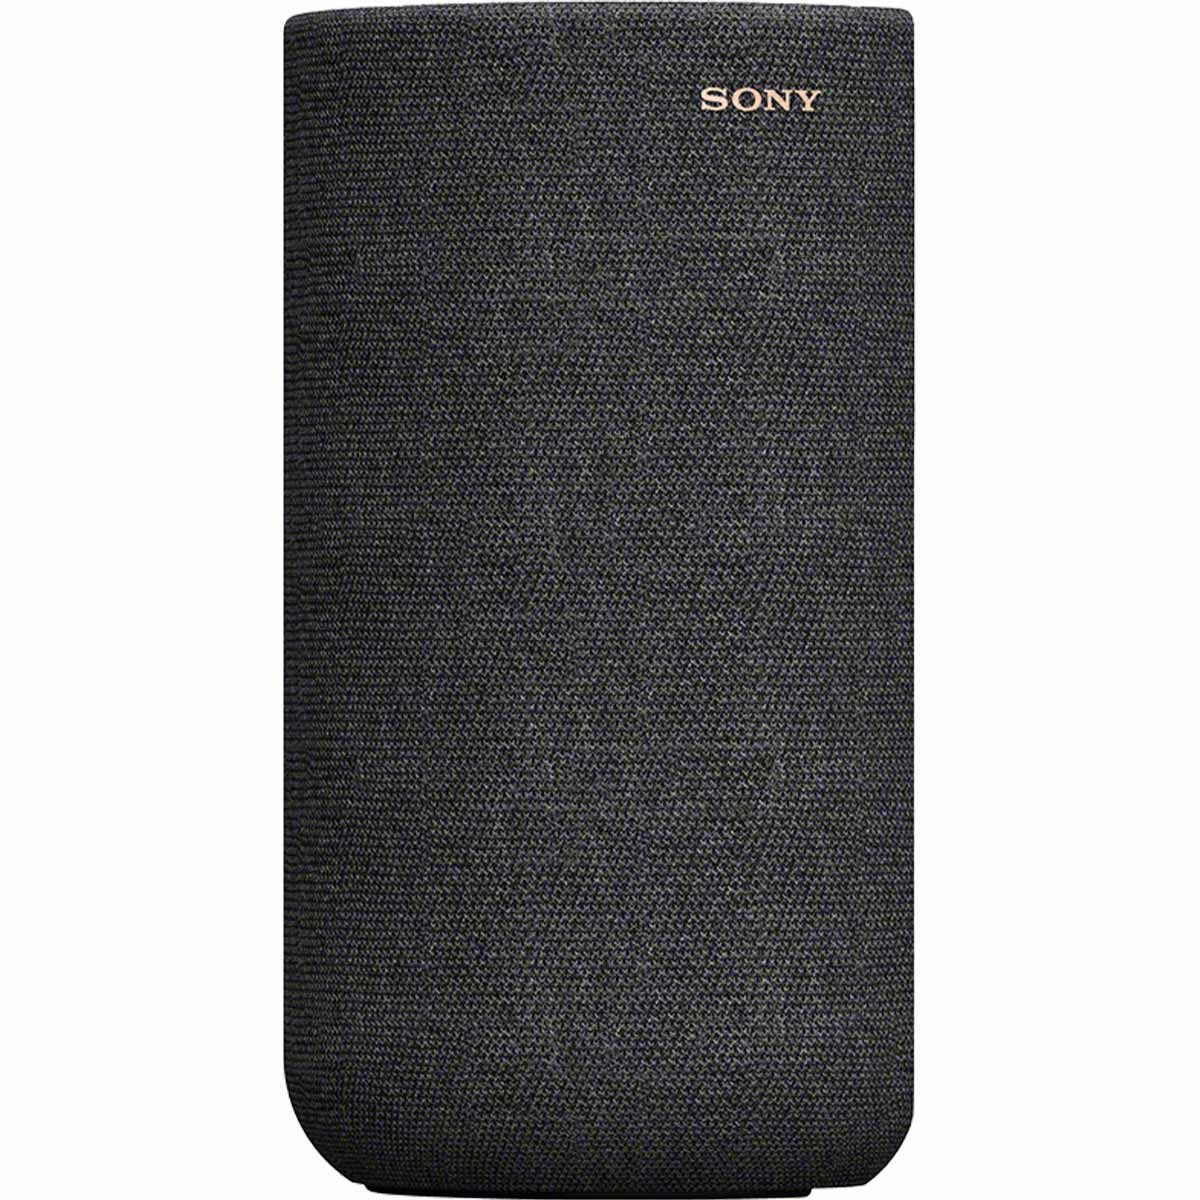 Sony SARS5 Wireless rear speakers with built-in battery for HT-A7000/HT-A5000 - angled view of single